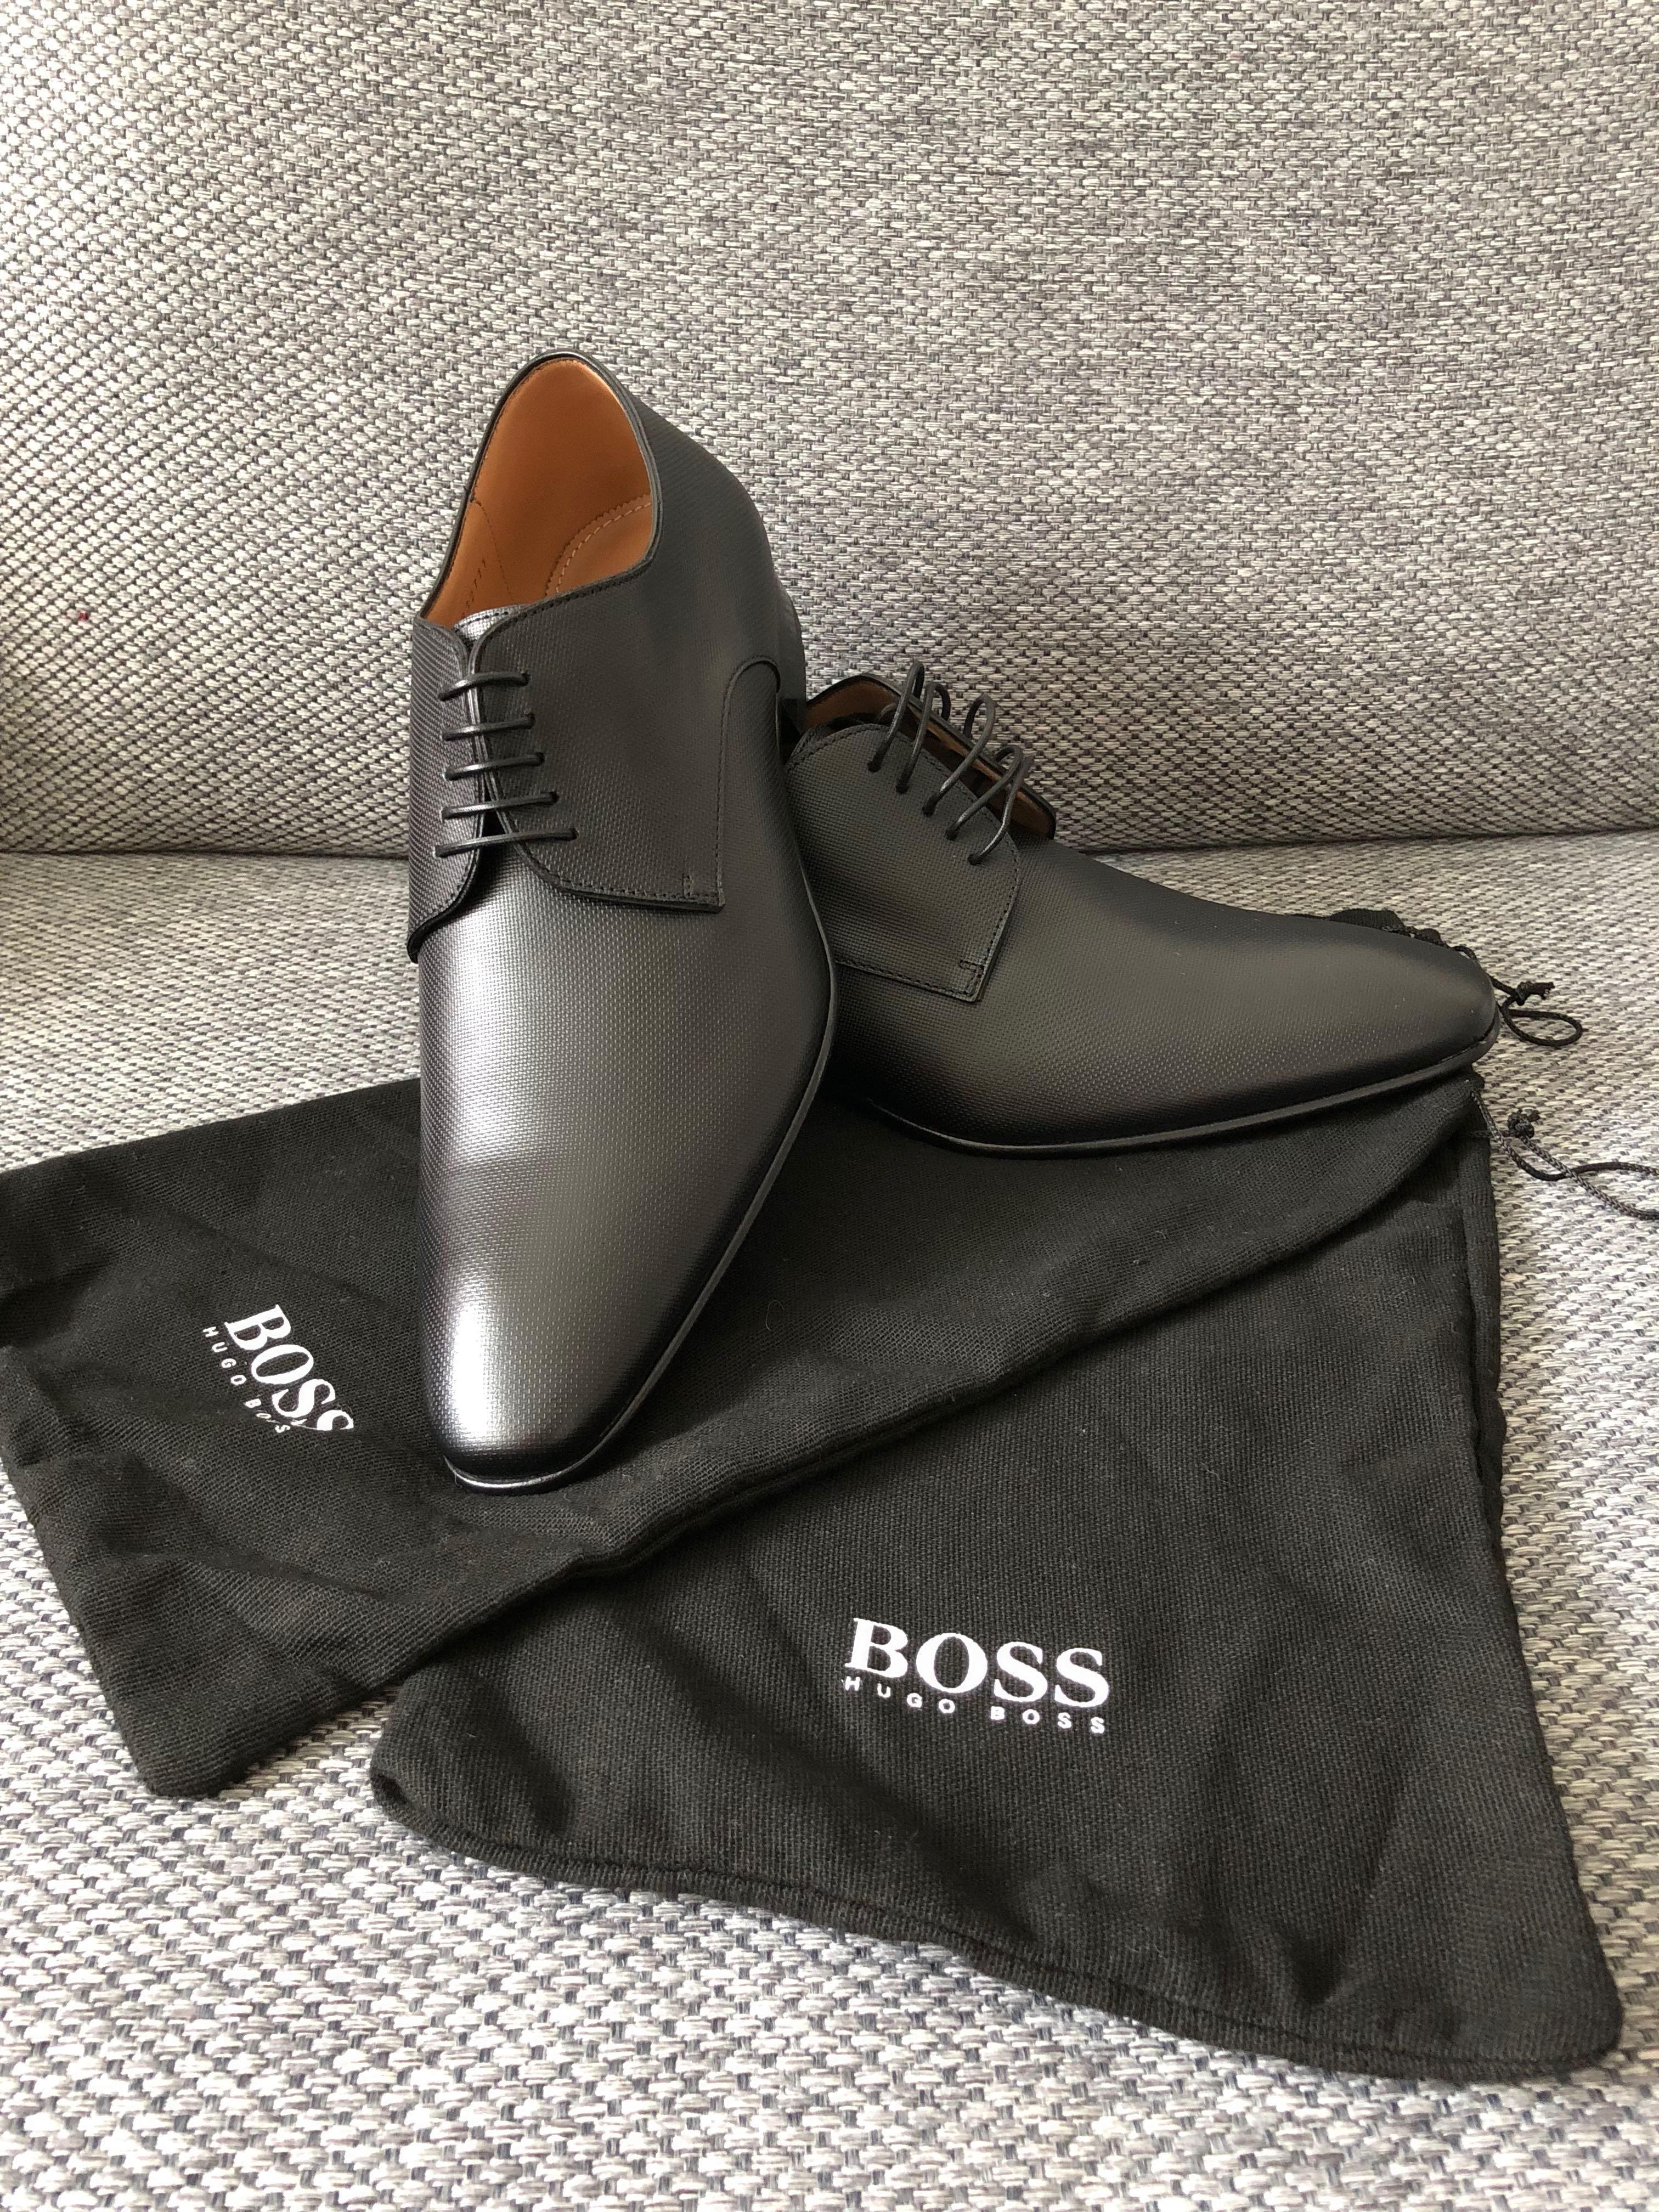 Brand new HUGO BOSS Derby shoes with 